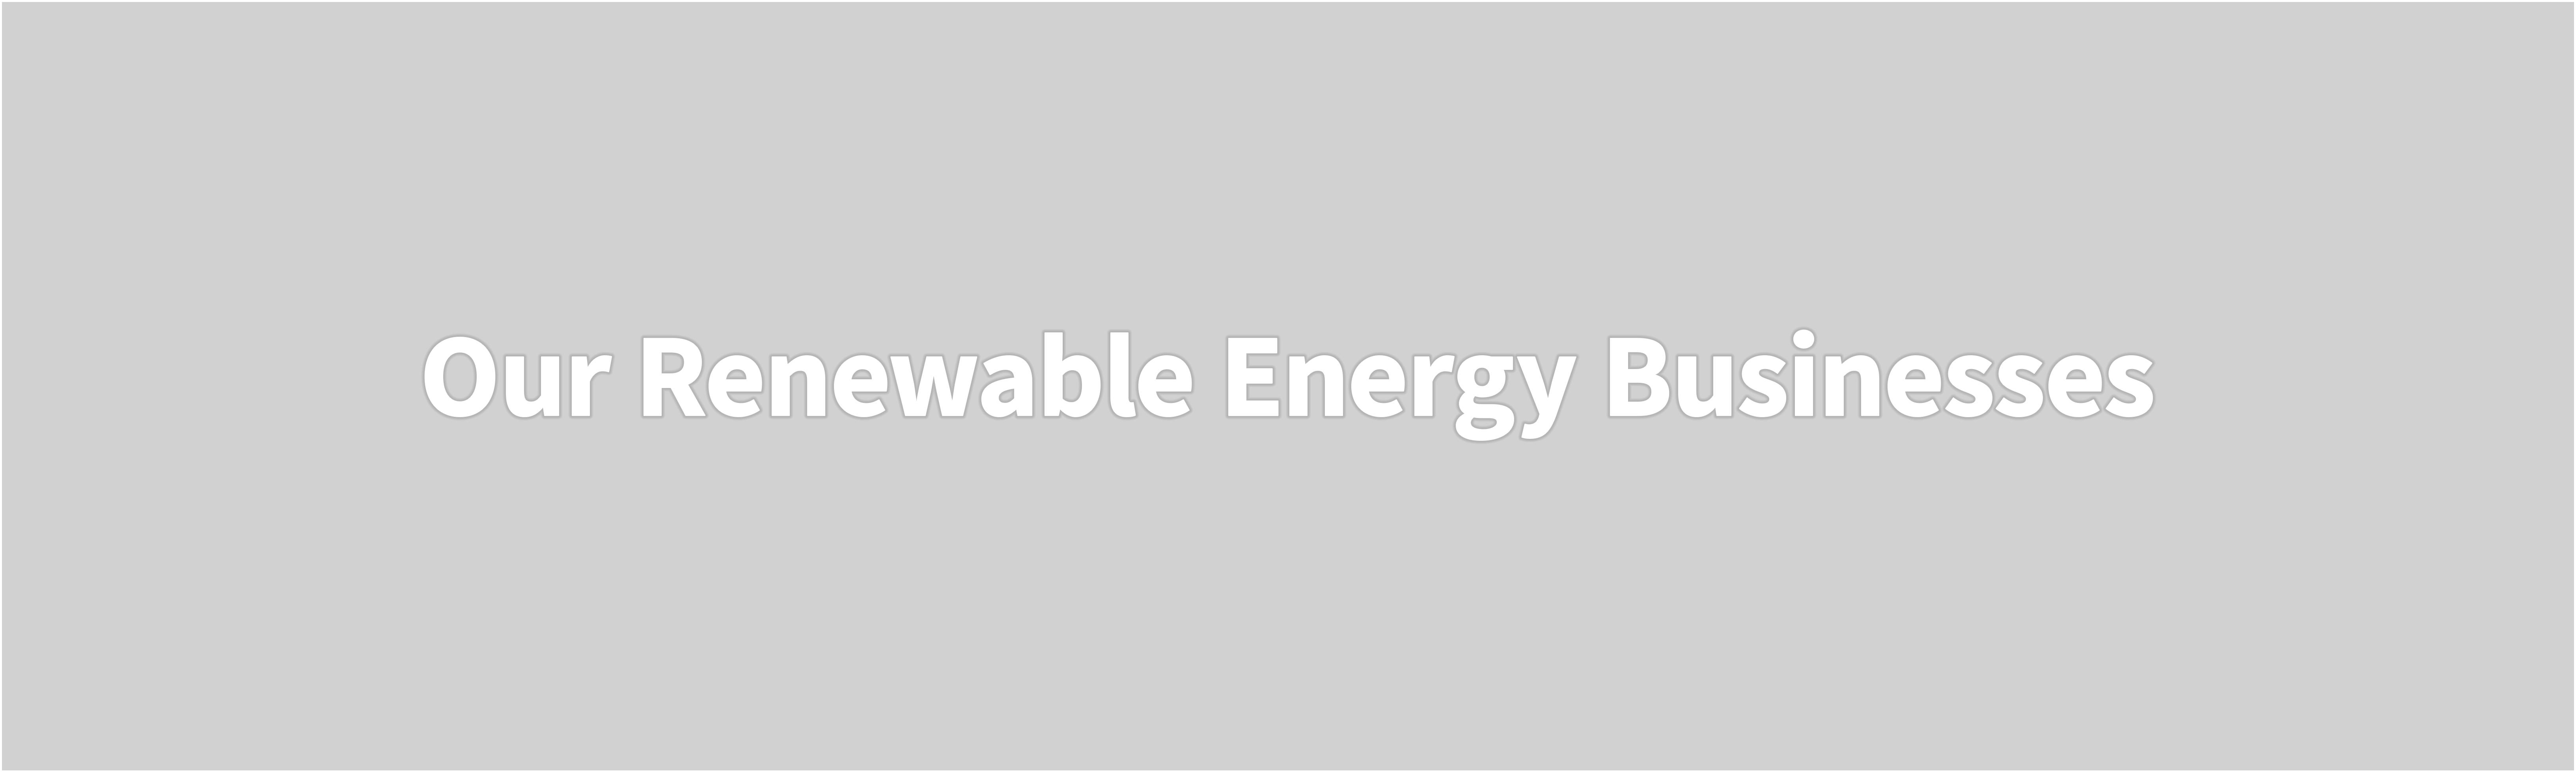 Our Renewable Energy Businesses